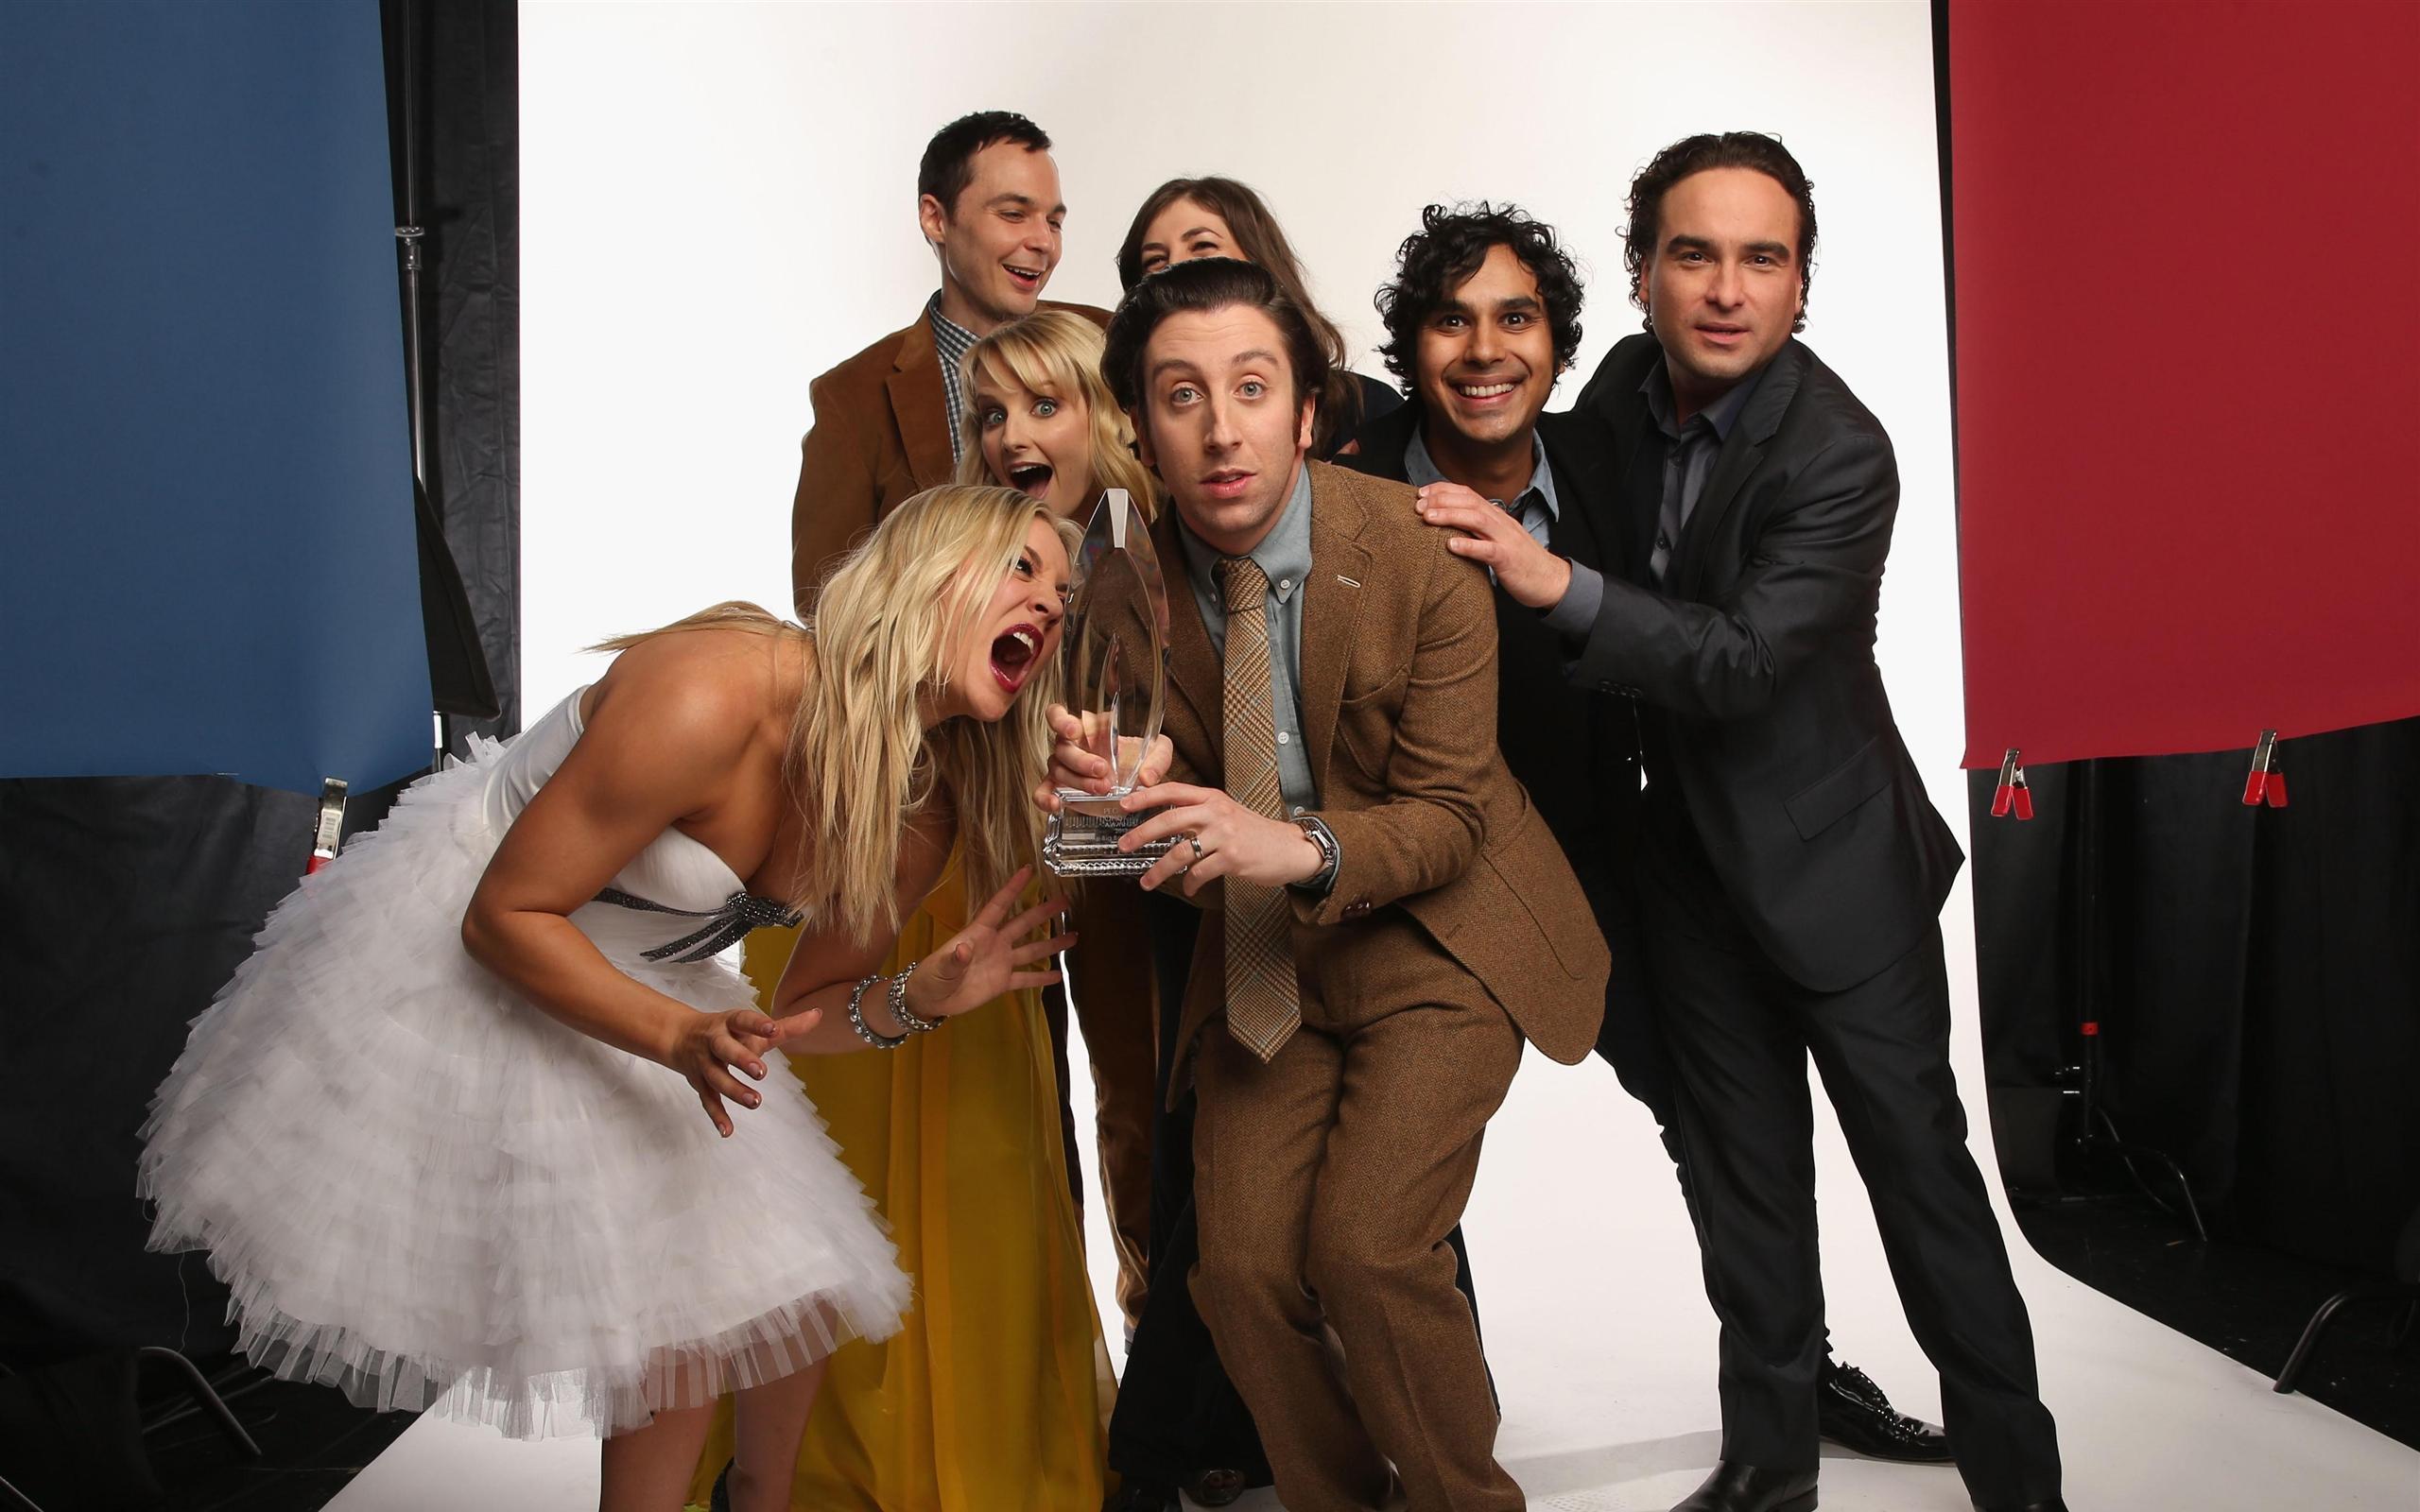 The Big Bang Theory cast pose for a portrait during the 39th Annual